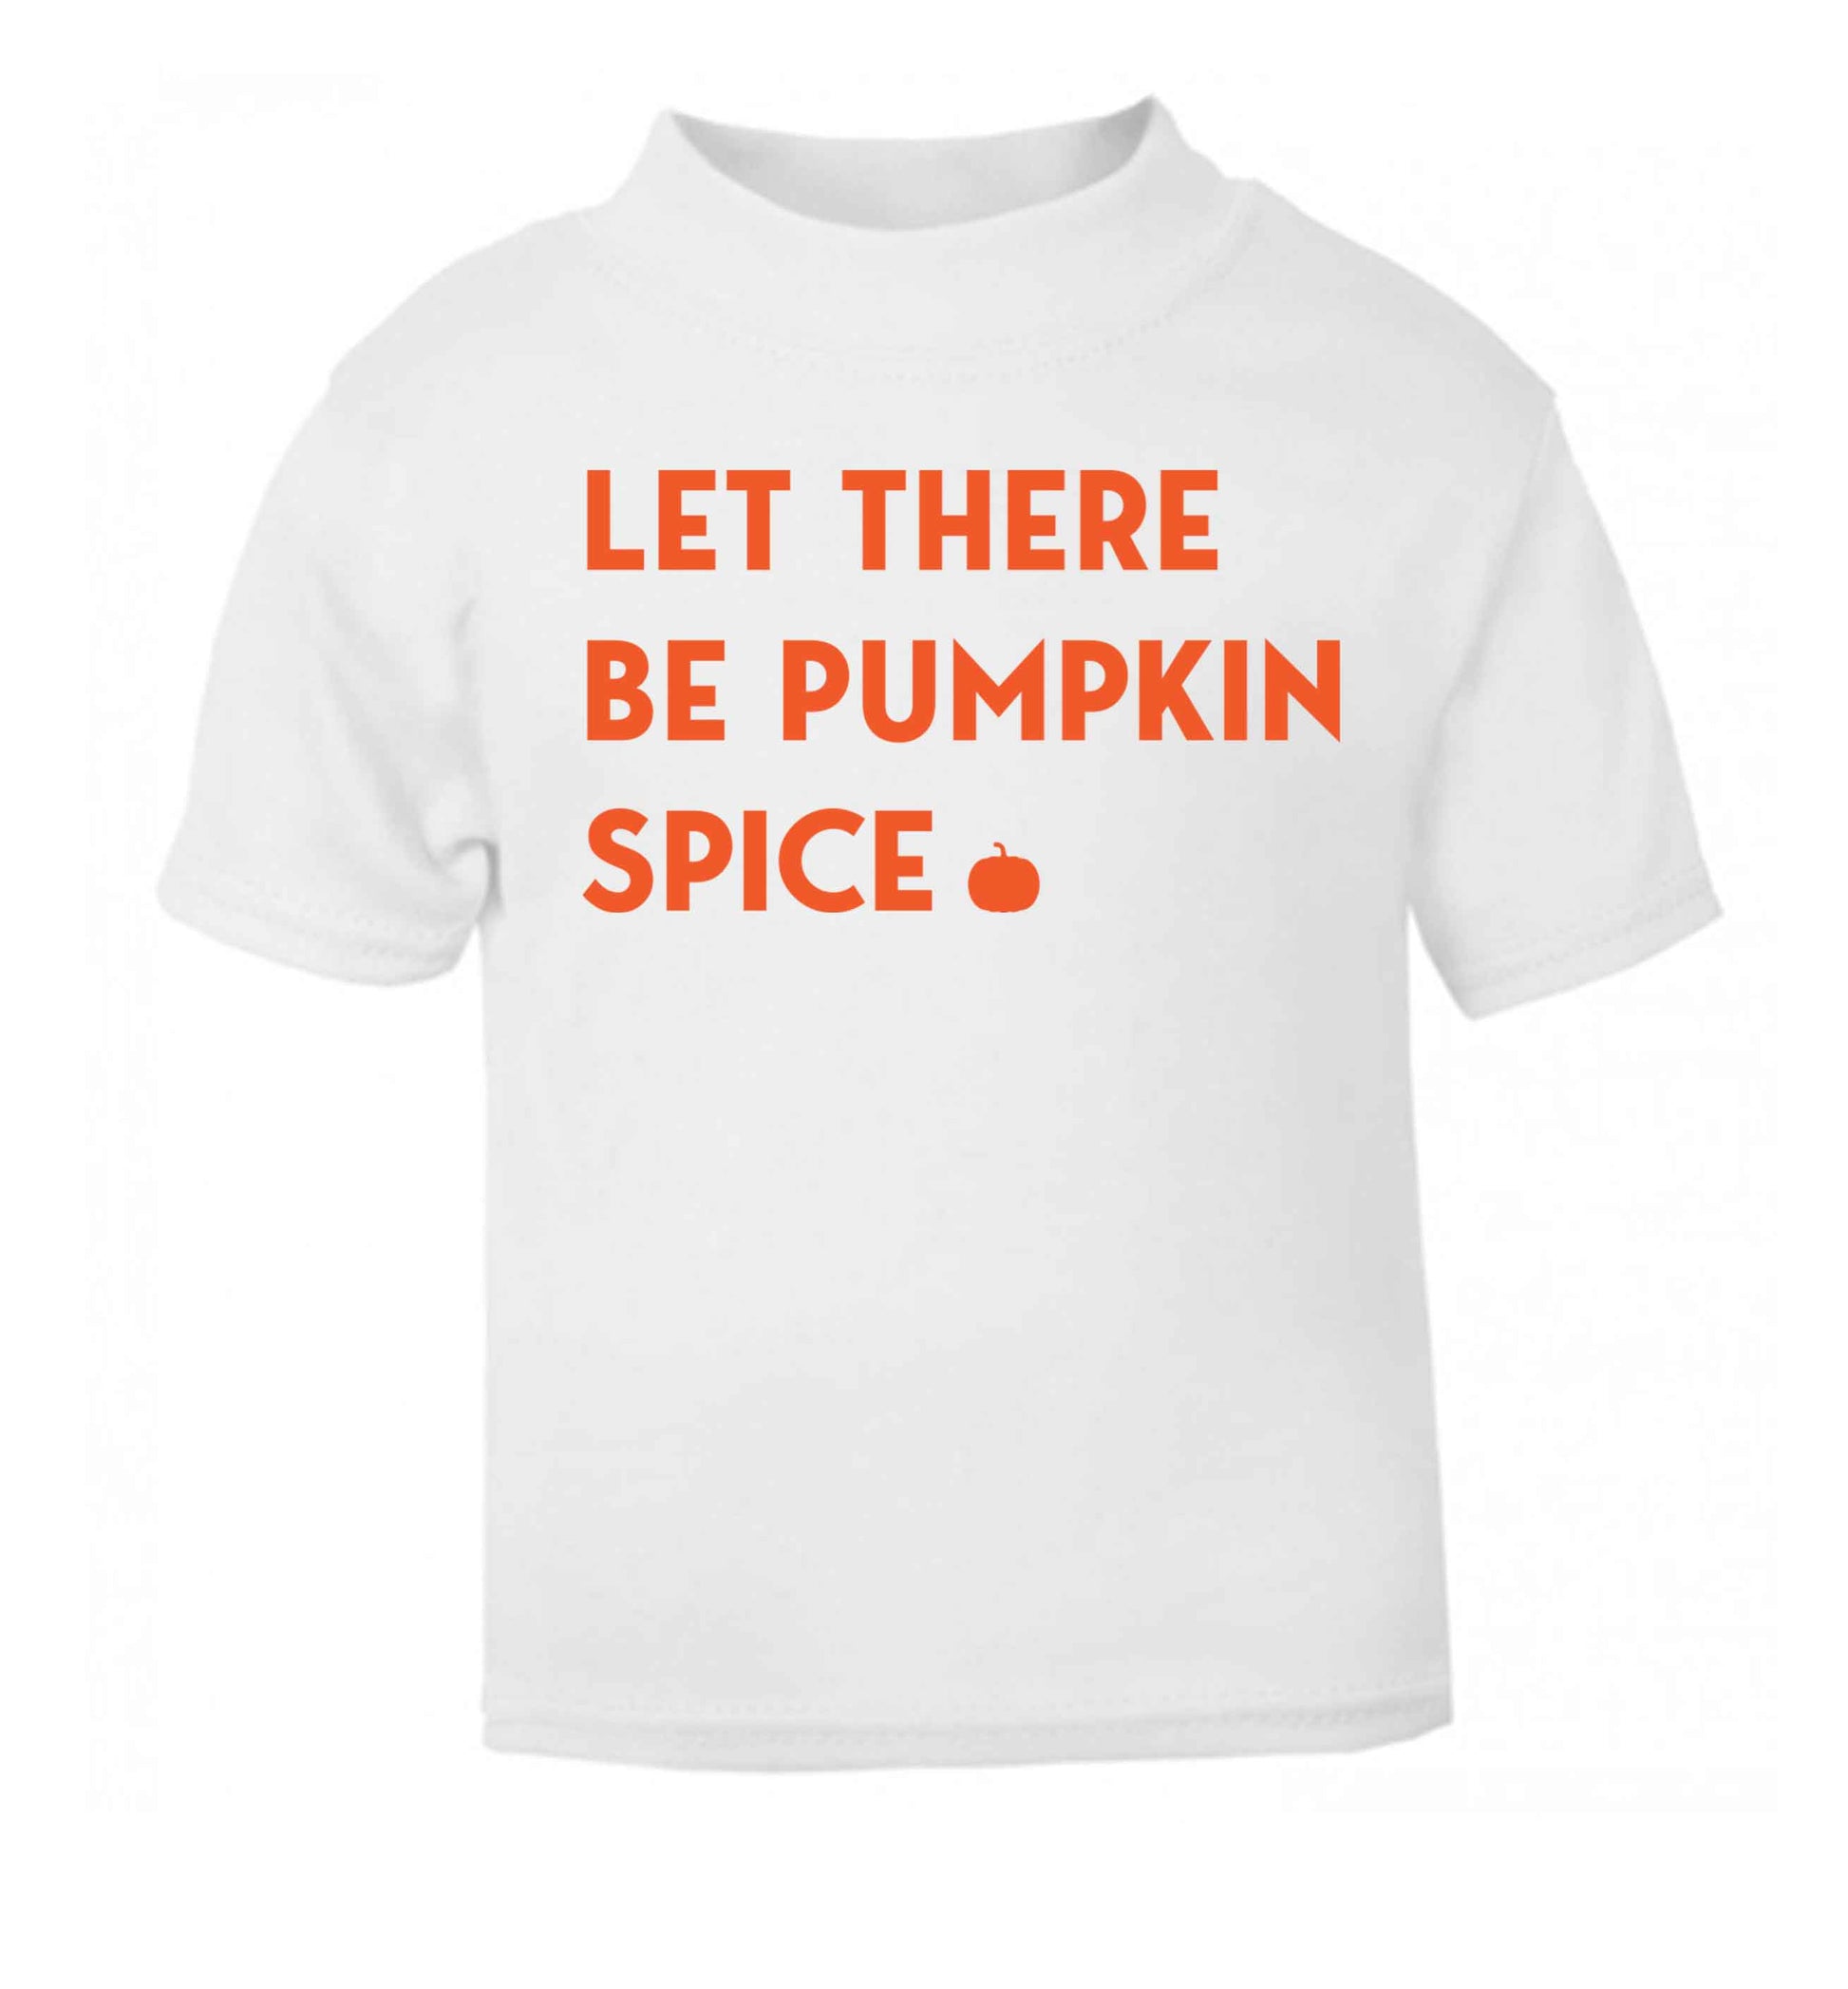 Let Be Pumpkin Spice white baby toddler Tshirt 2 Years